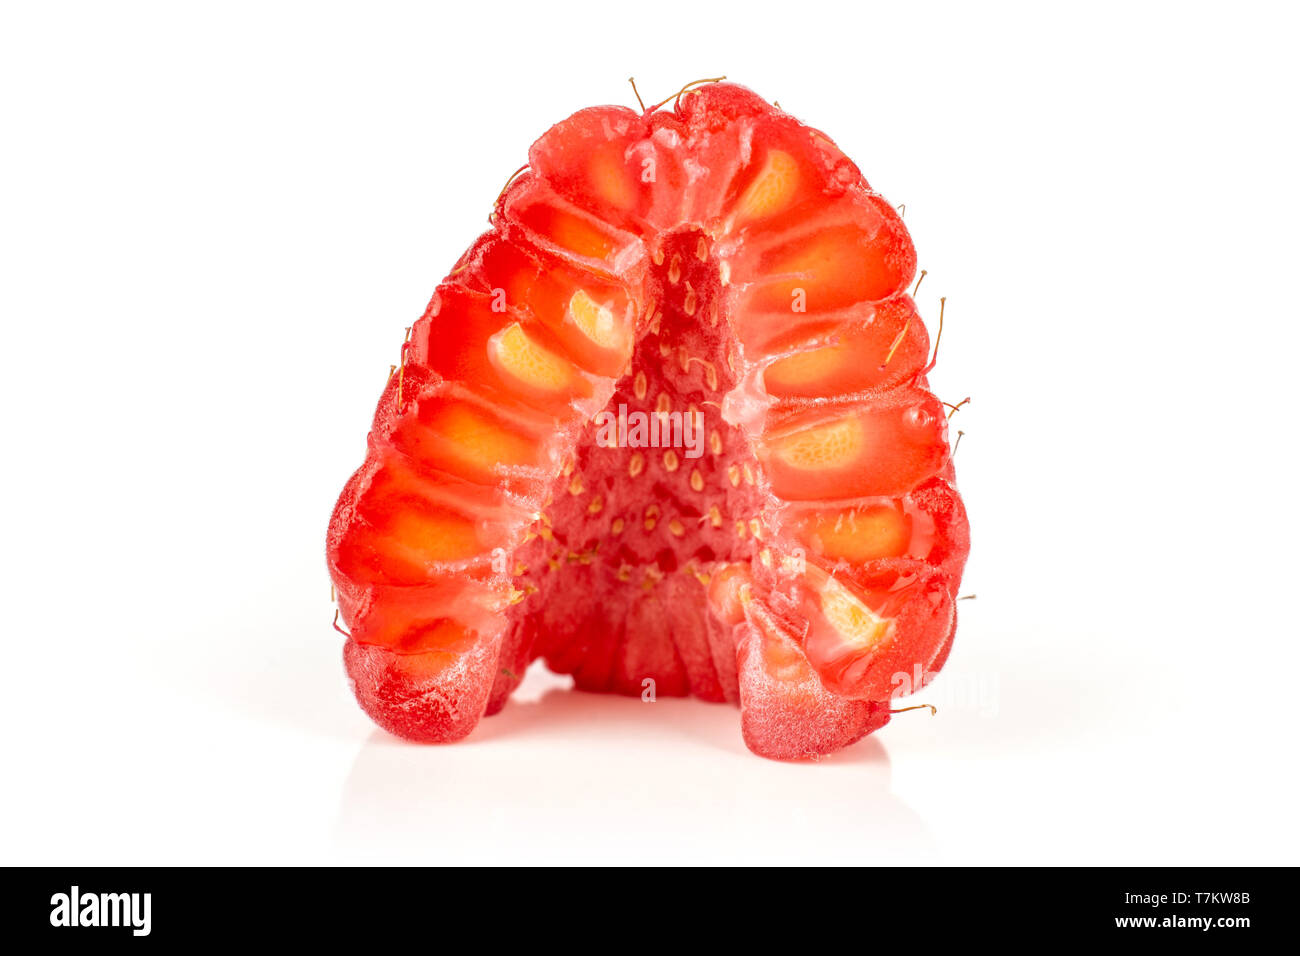 One half of fresh red raspberry cross section isolated on white background Stock Photo